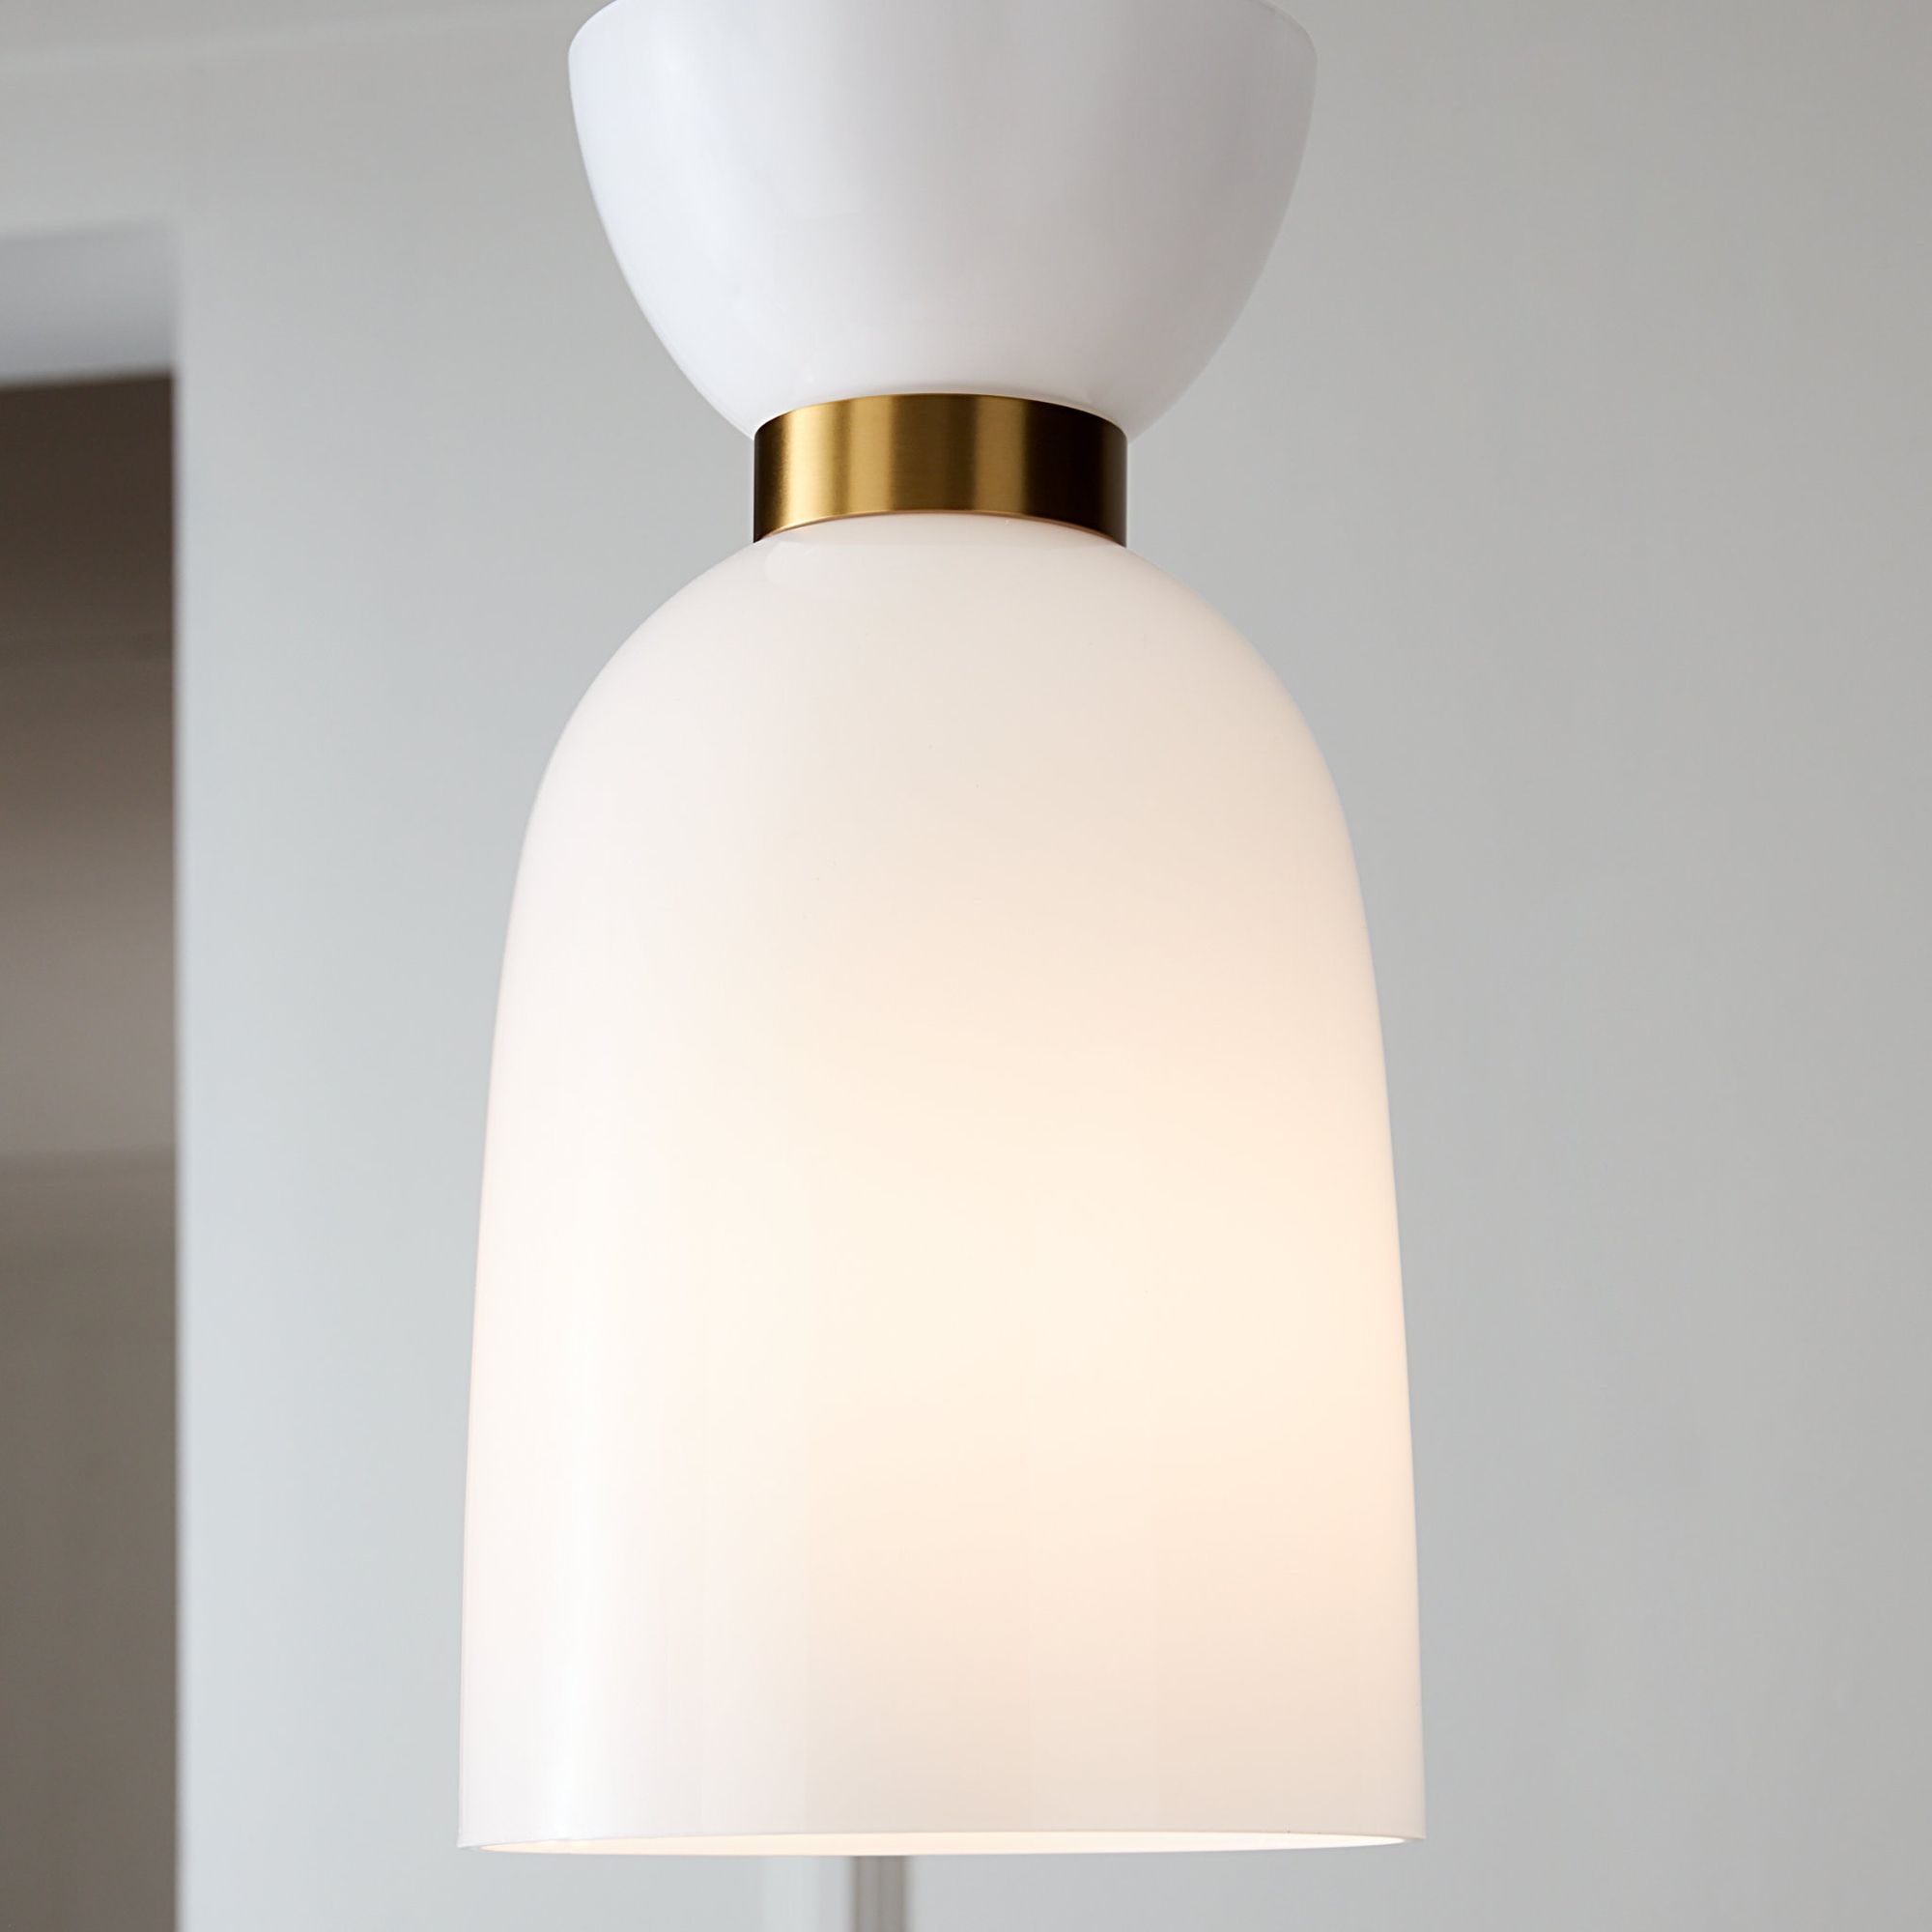 kate spade new york Londyn Tall Pendant in Burnished Brass with Milk White Glass